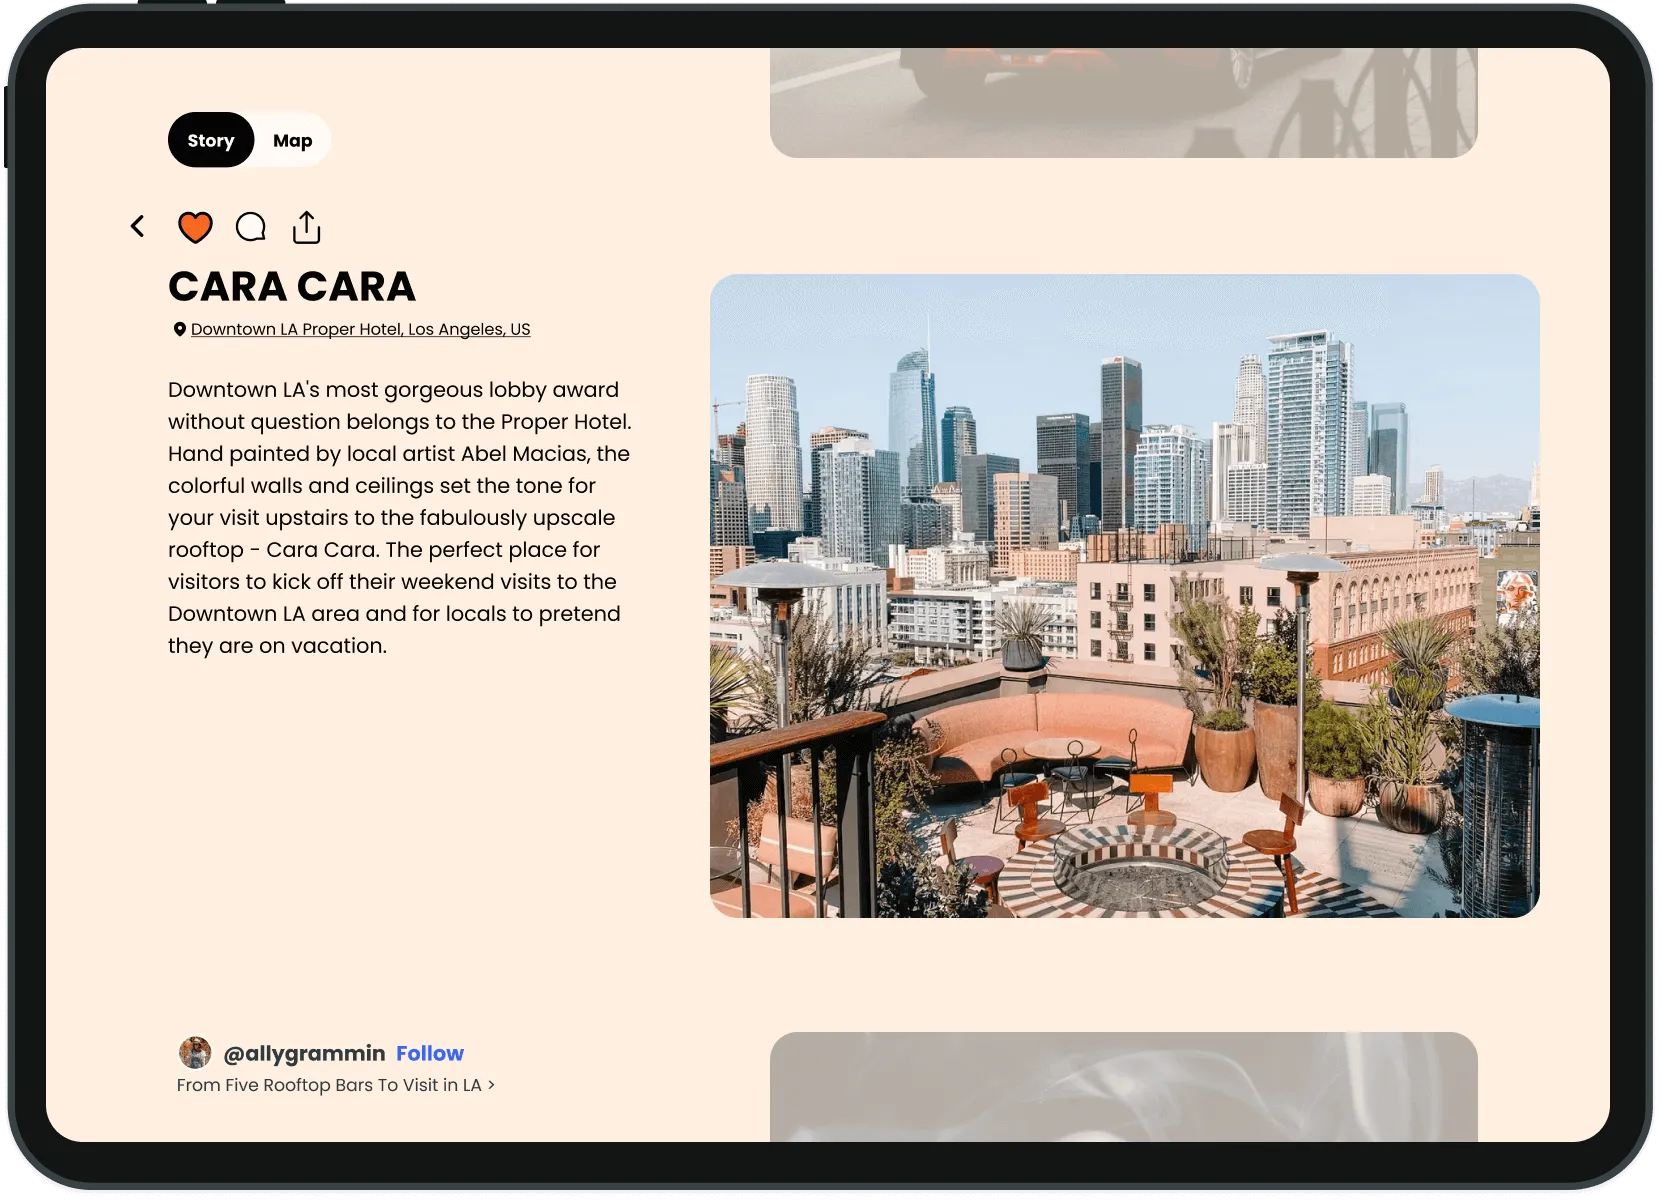 Screen from the web app, showing a user generated travel story